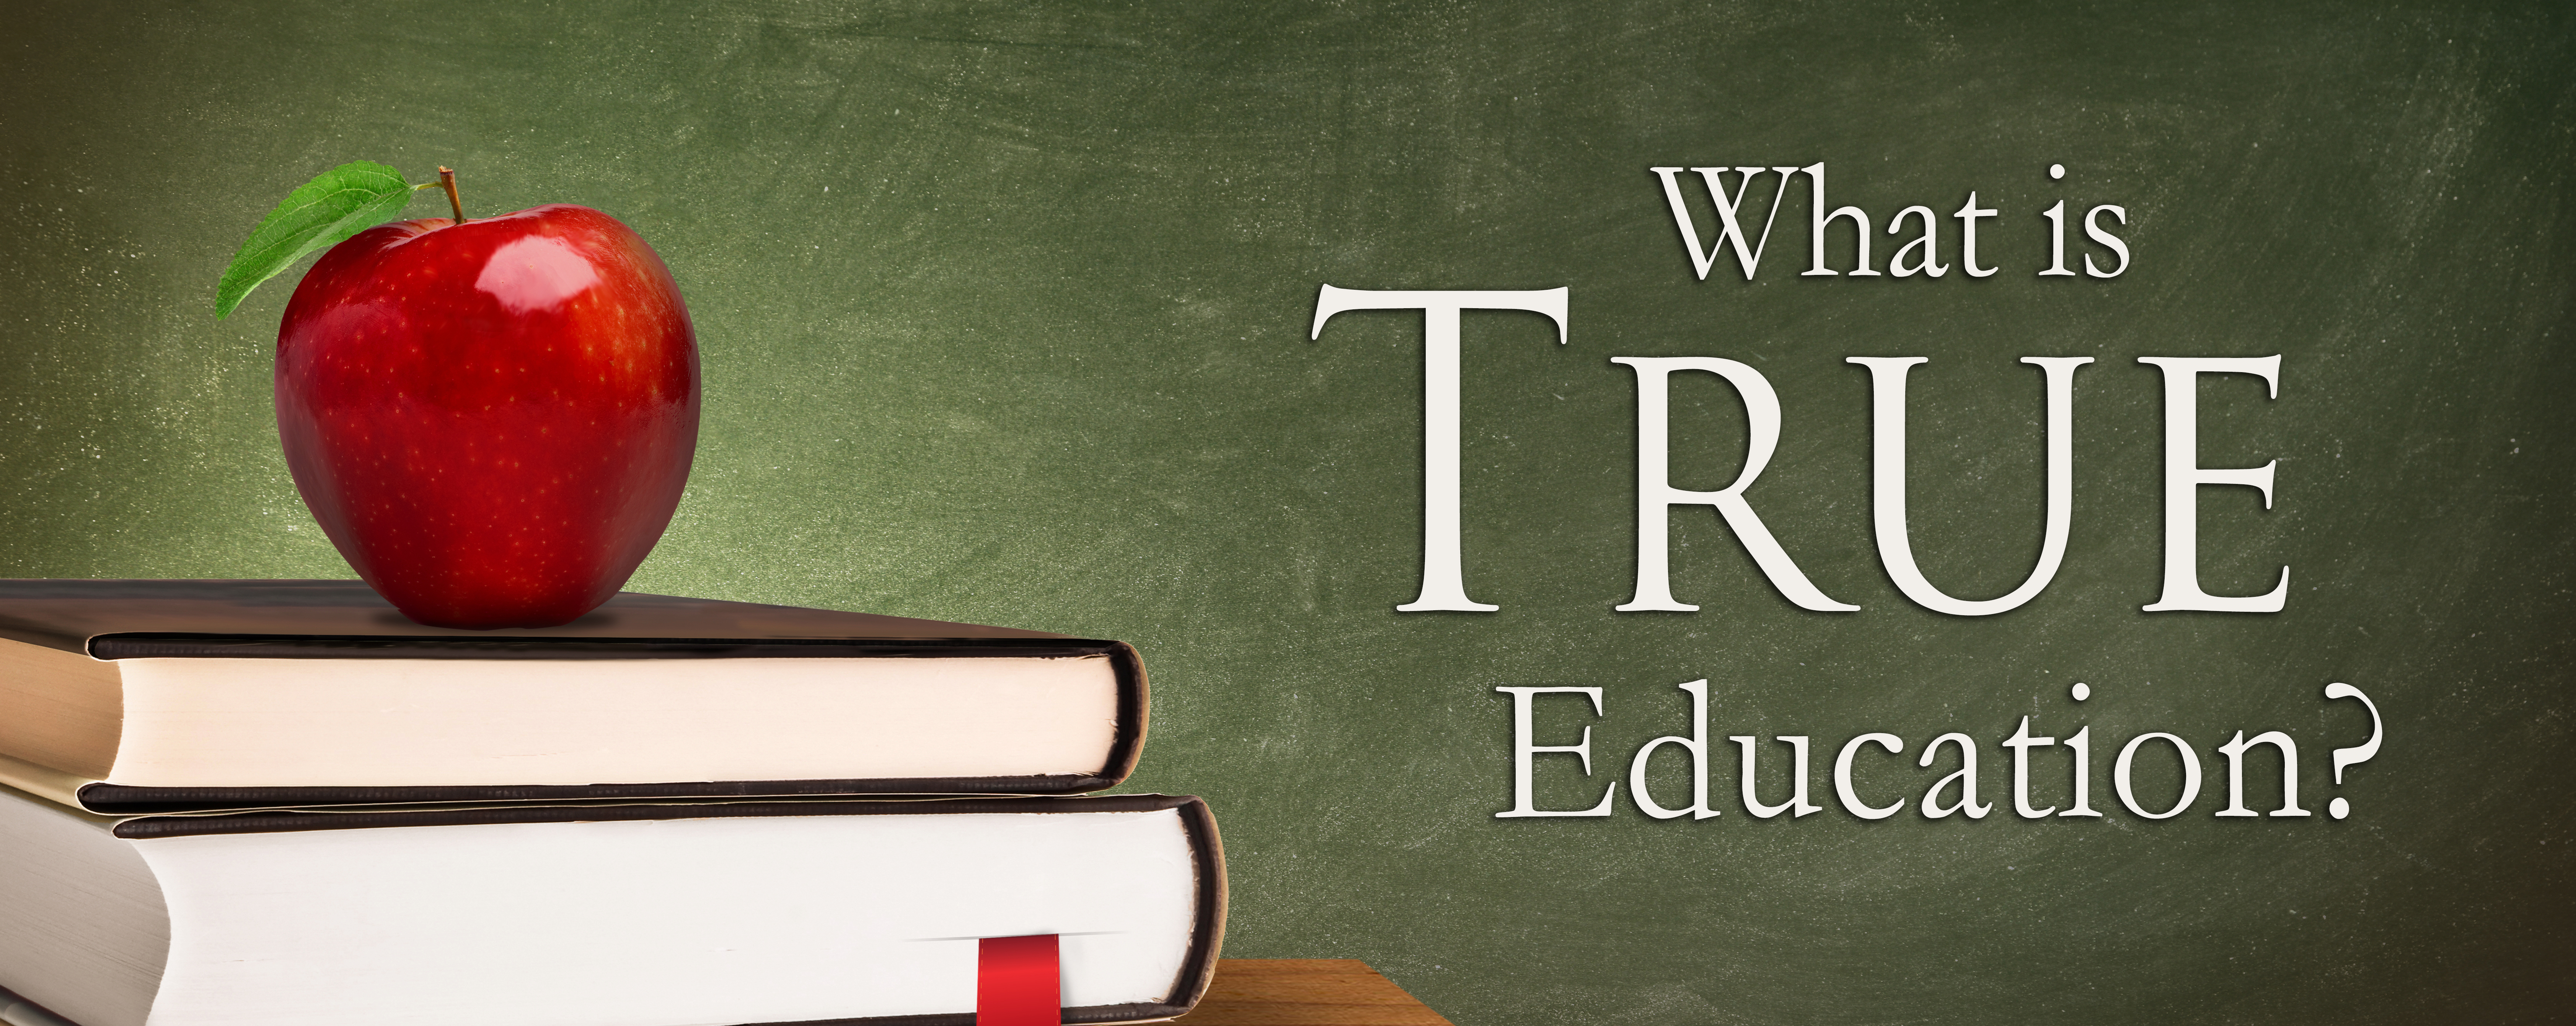 What is True Education?